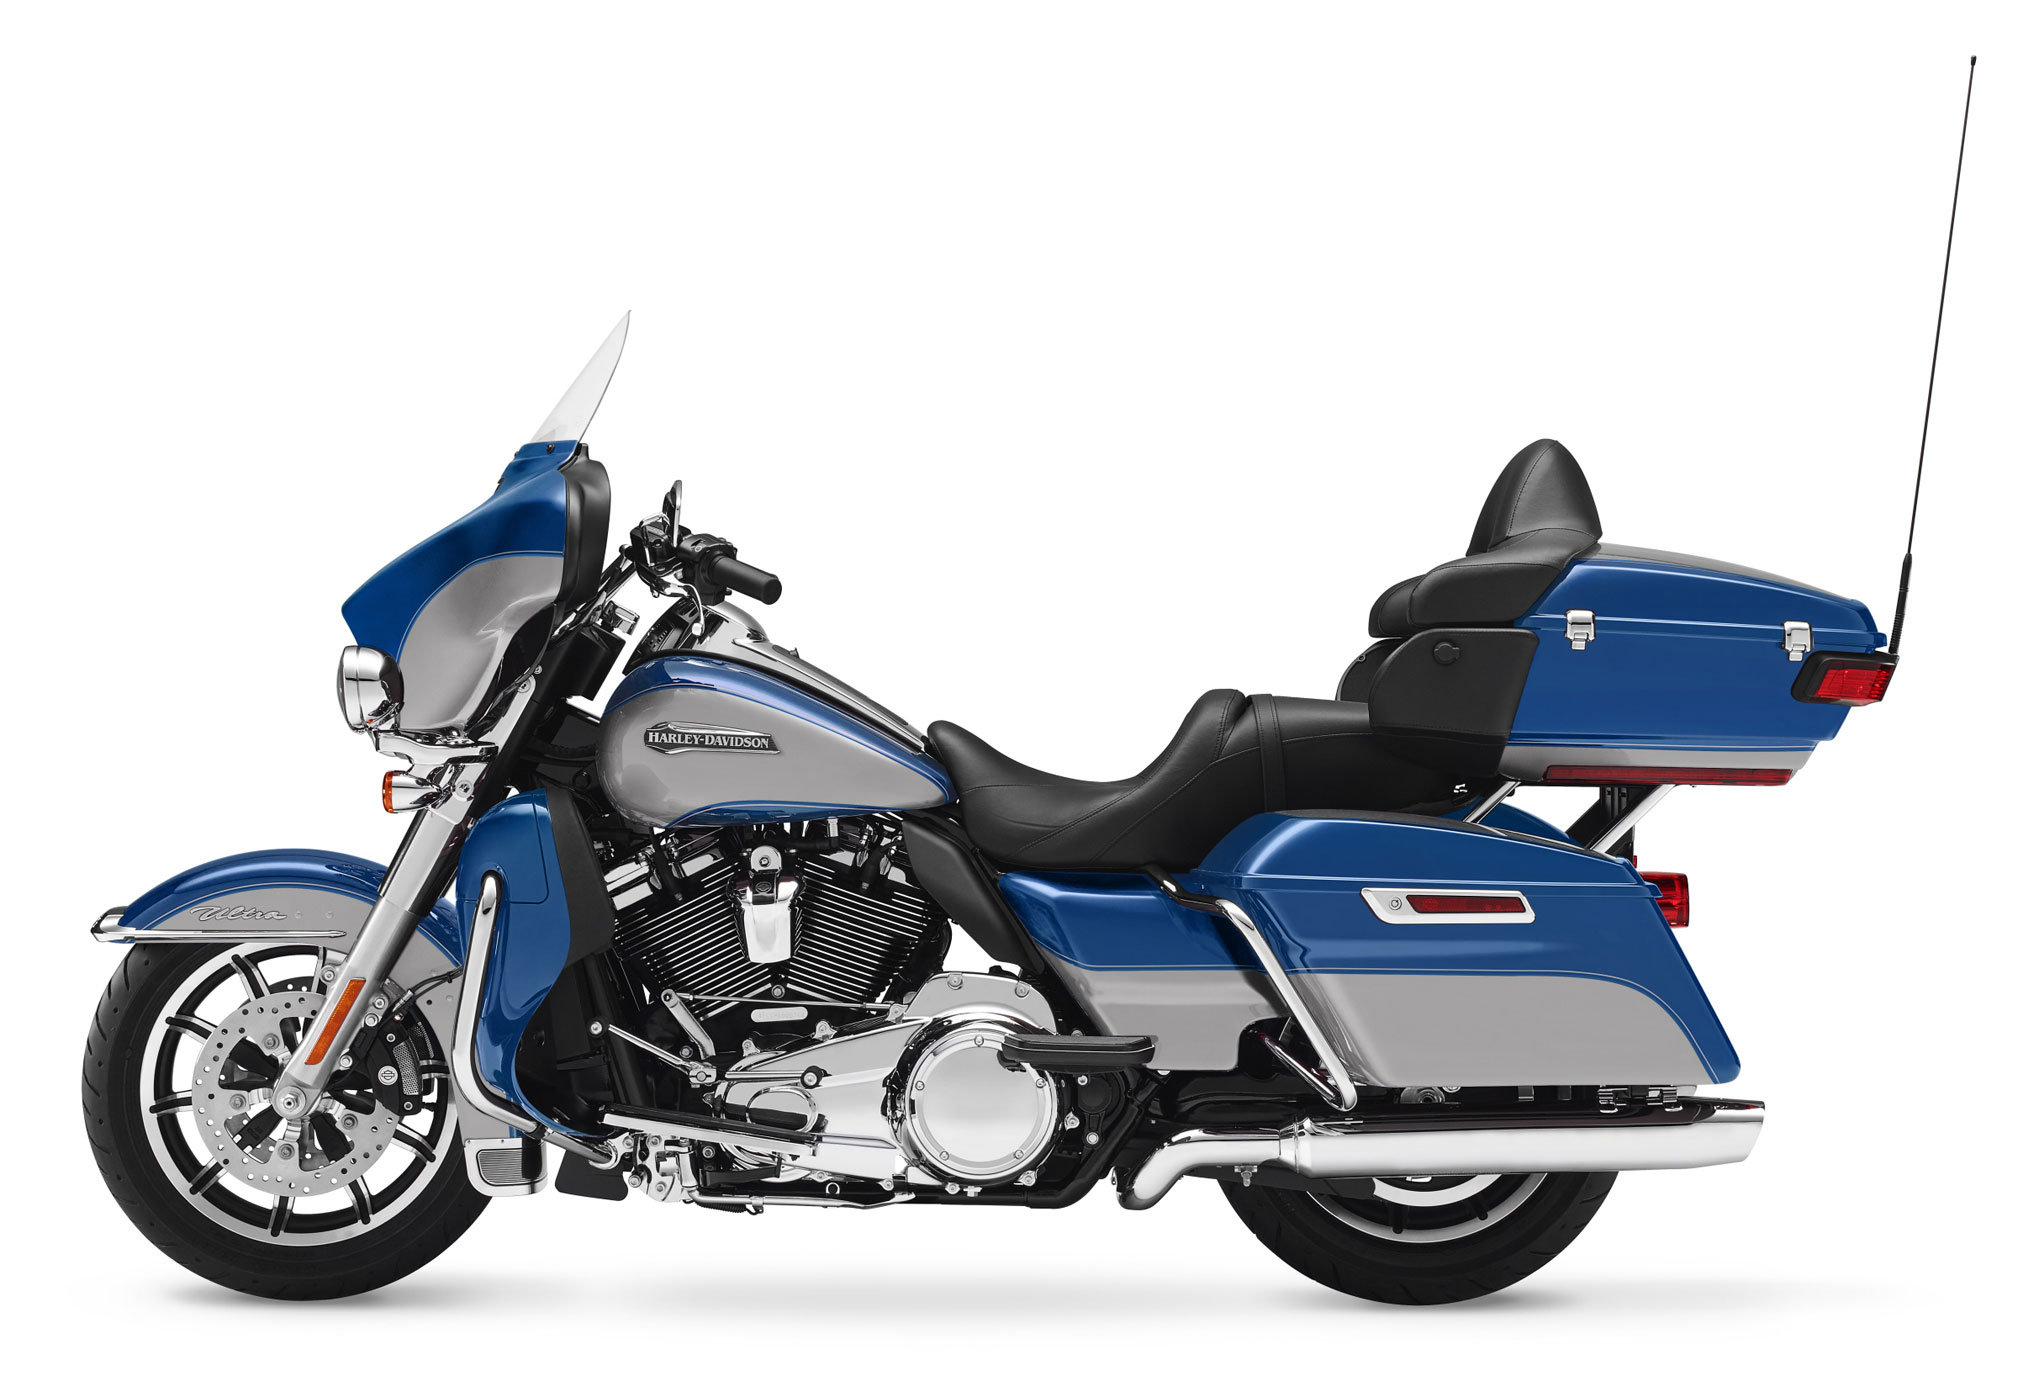 2018 Harley Davidson Electra Glide Ultra Classic Review Total Motorcycle